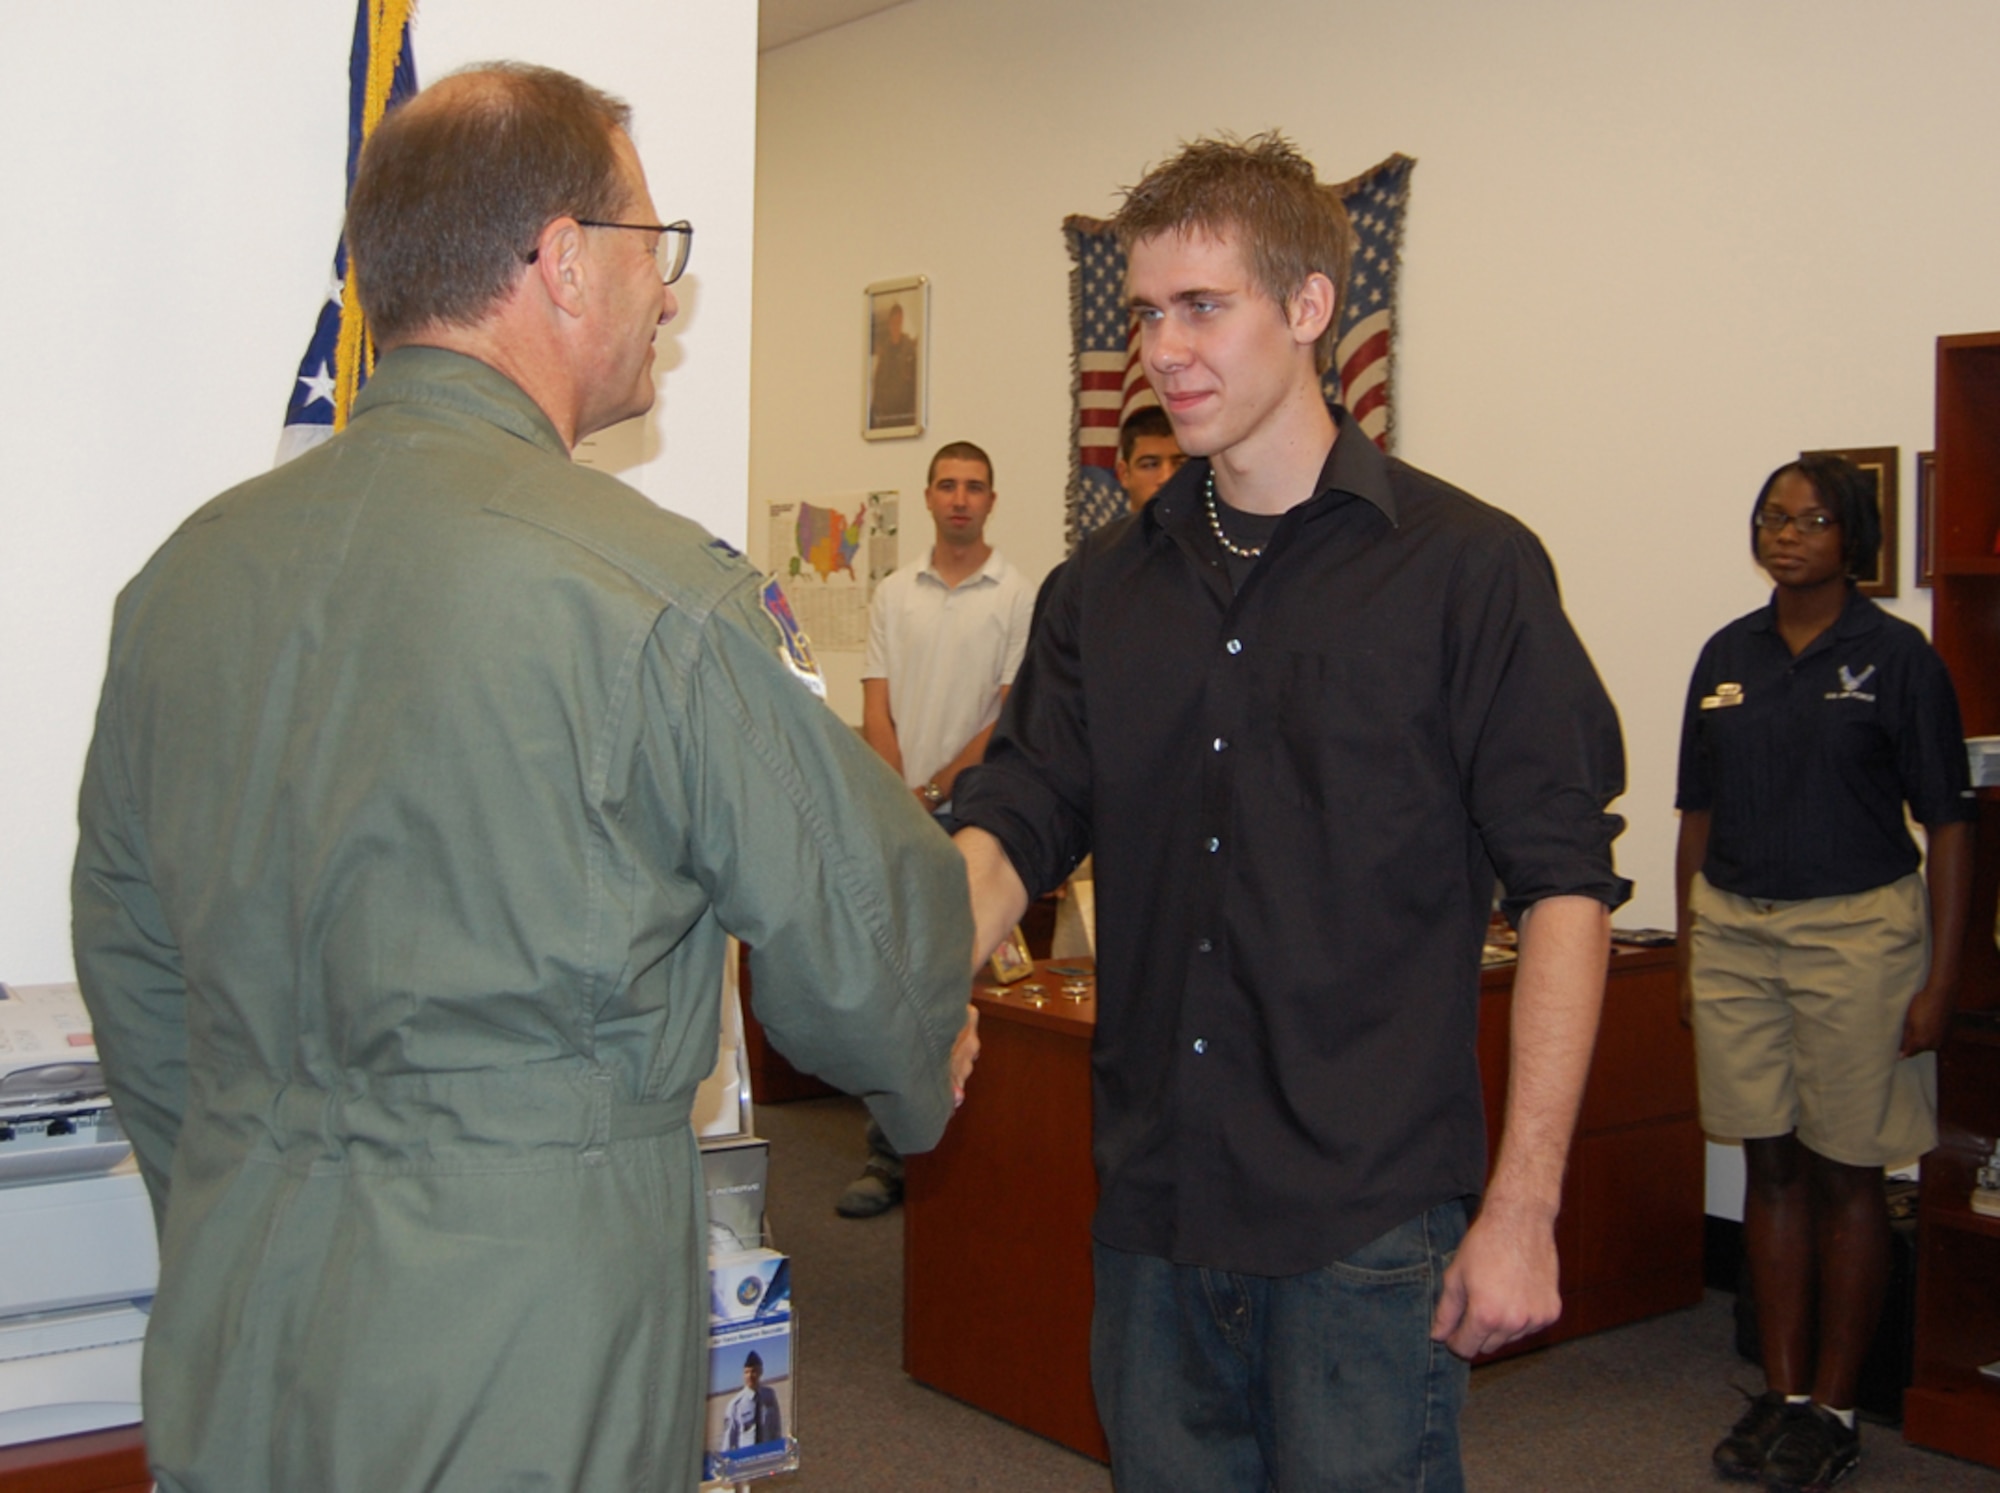 Col. Brunke (left), 926th Group commander, congratulates local Las Vegas resident David Kammler, after administering the Oath of Enlistment during a monthly meeting Aug. 7 at the Craig Road Air Force Reserve Recruiting station. Kammler became part of the Delayed Entry Program, where he enlisted into the Individual Ready Reserve component while awaiting to leave for Basic Military Training. Upon completion of BMT and technical training school, Kammler will serve as an Air Force Reserve vehicle maintenance apprentice with the 555th RED HORSE Squadron here.